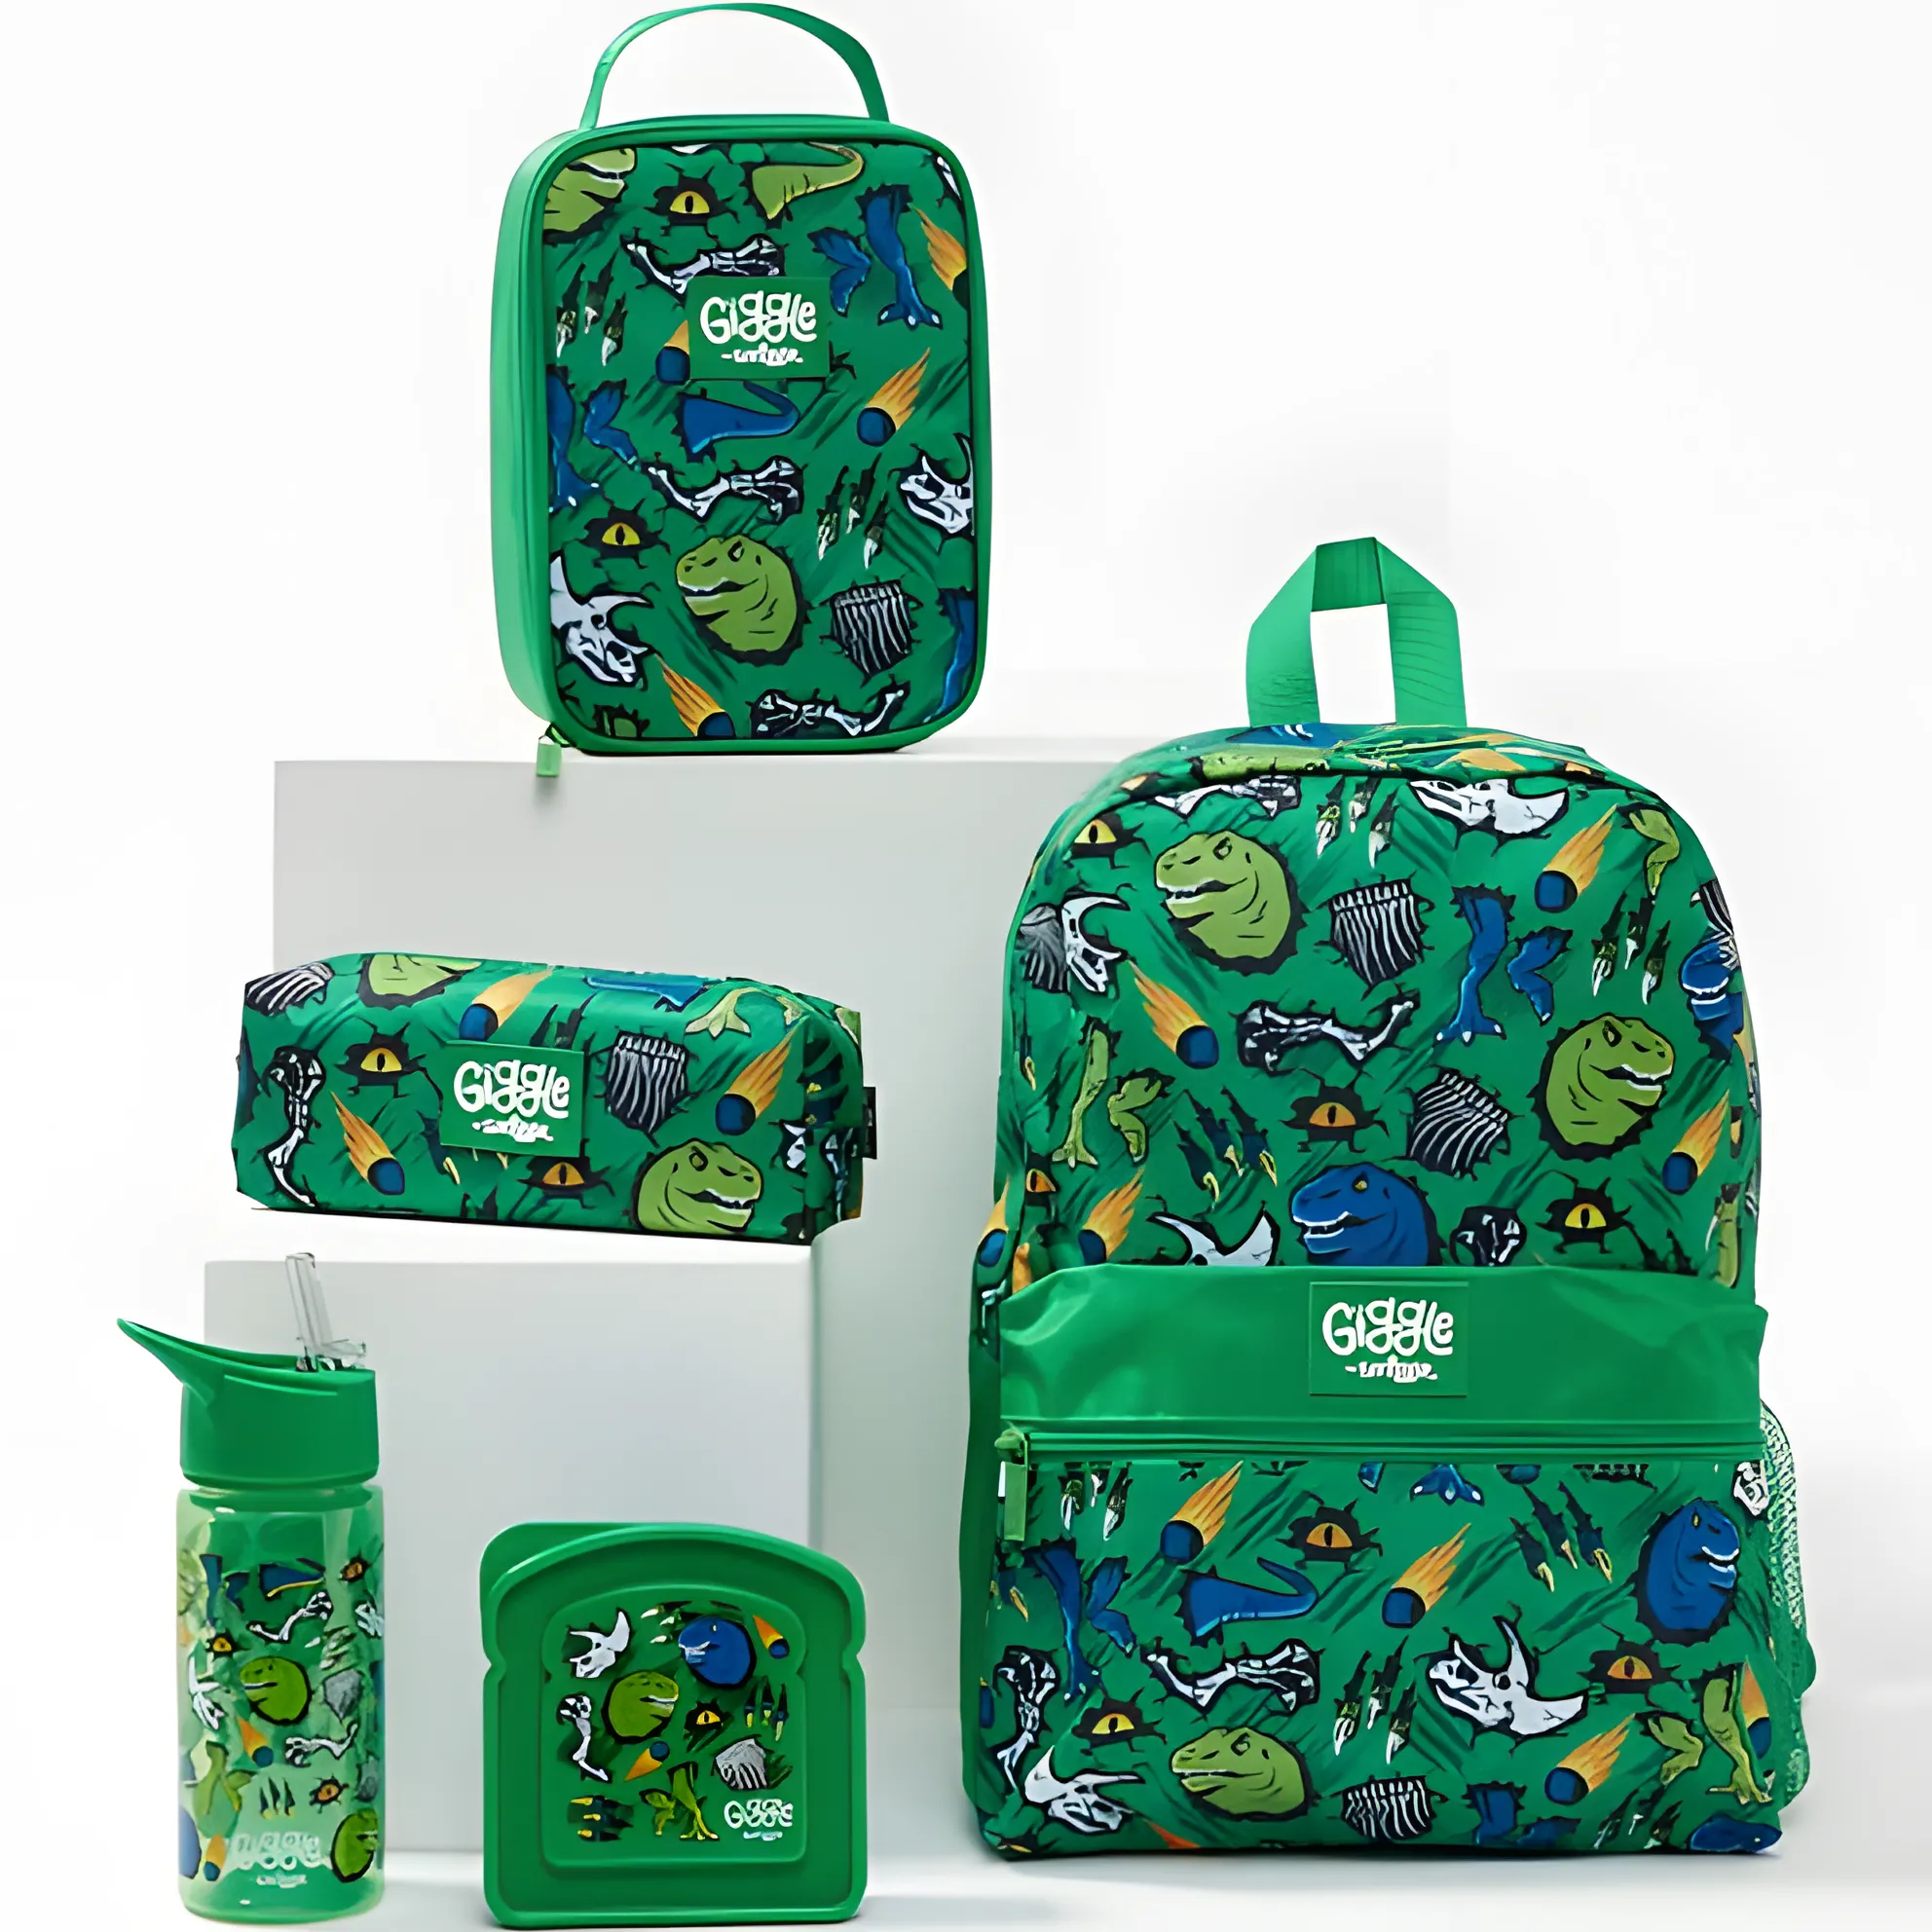 Free Giggle By Smiggle Backpack And Other School Stuff For Winners